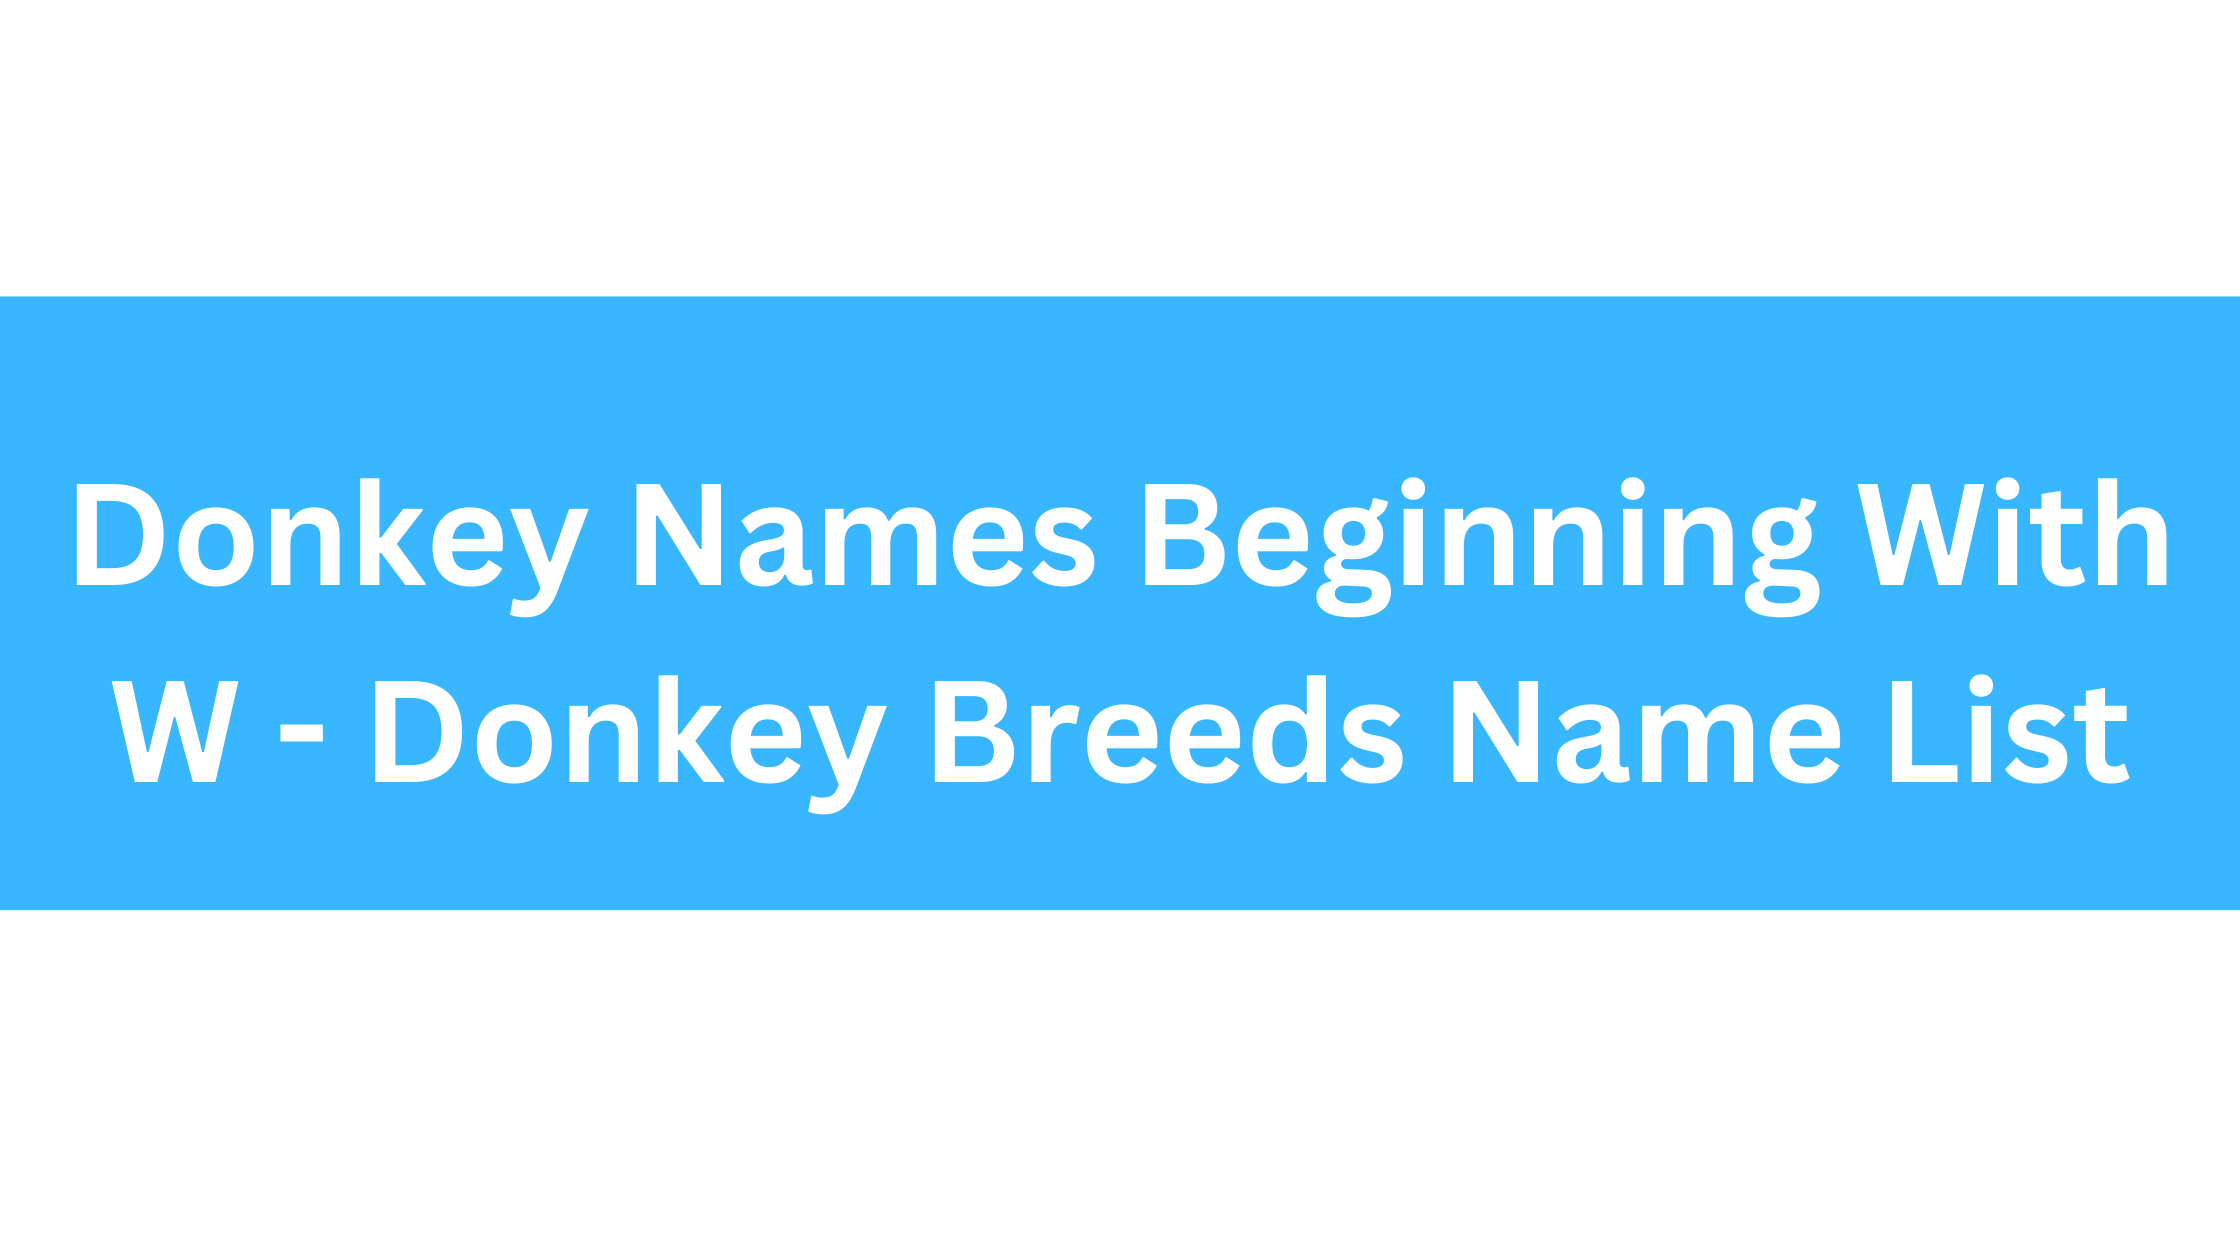 Donkey Names Beginning With W